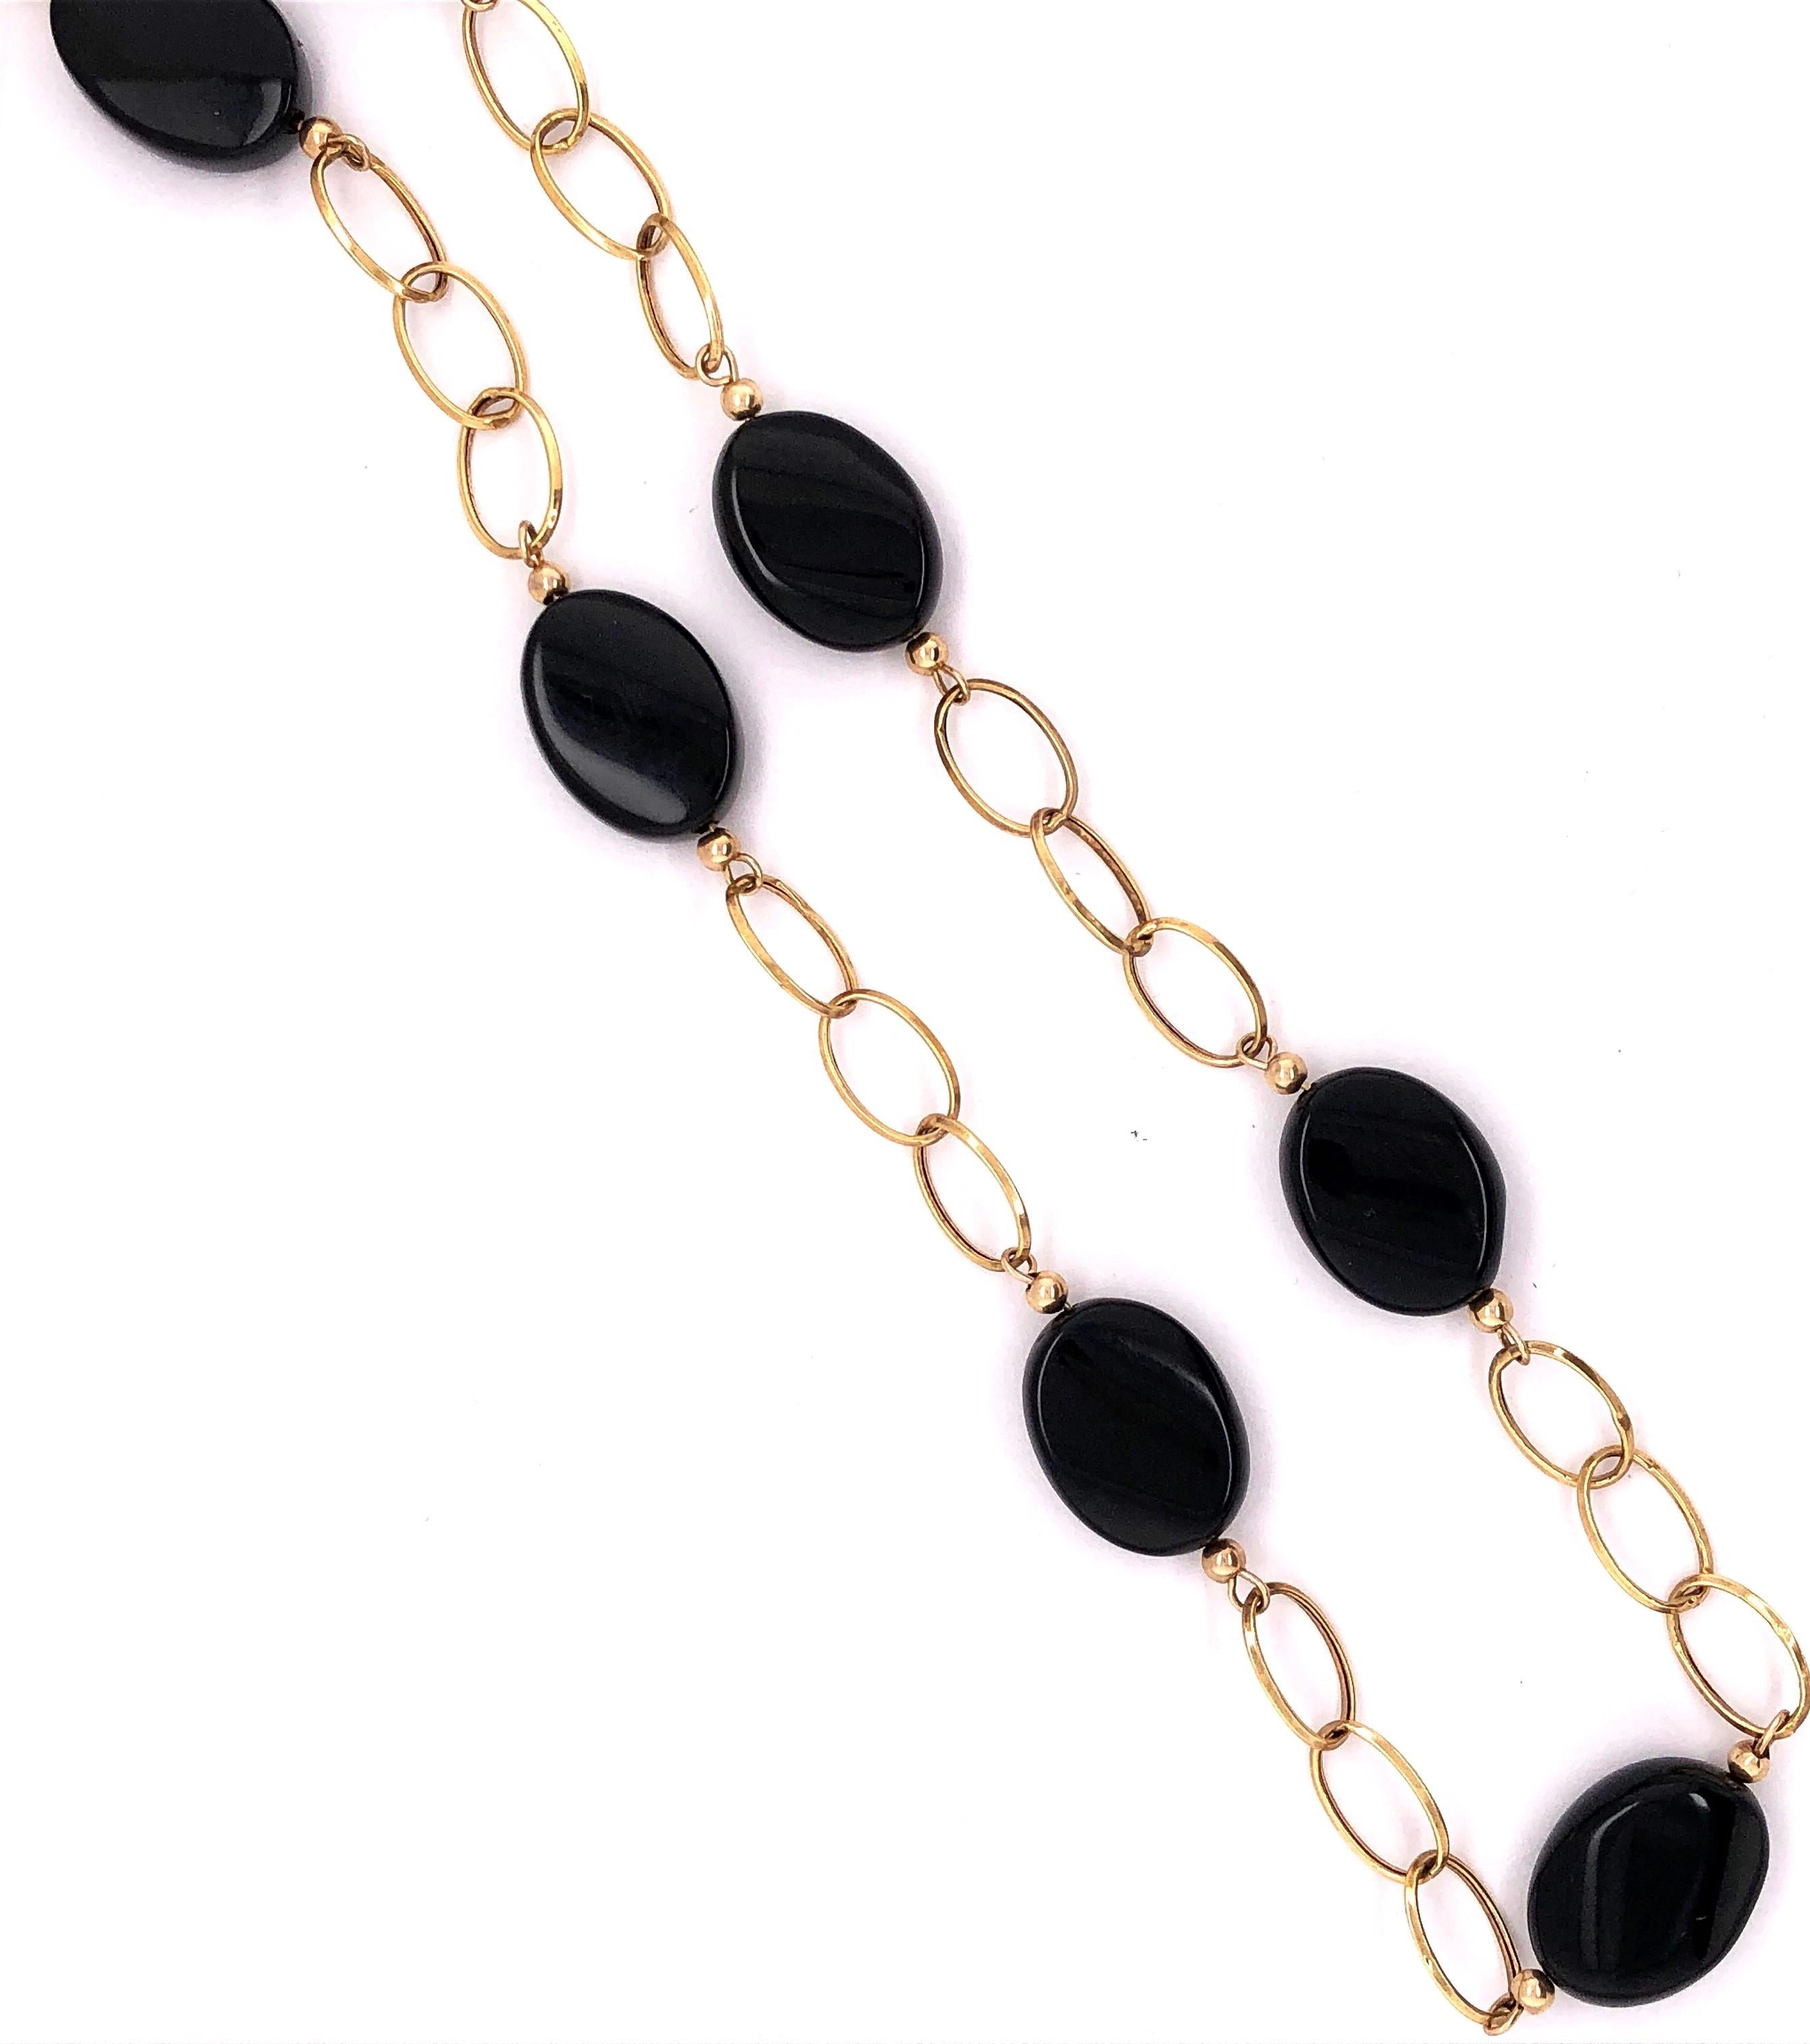 14Kt Yellow Gold Link Necklace with Ebony Stones 20 inch 21.2 Grams Total 